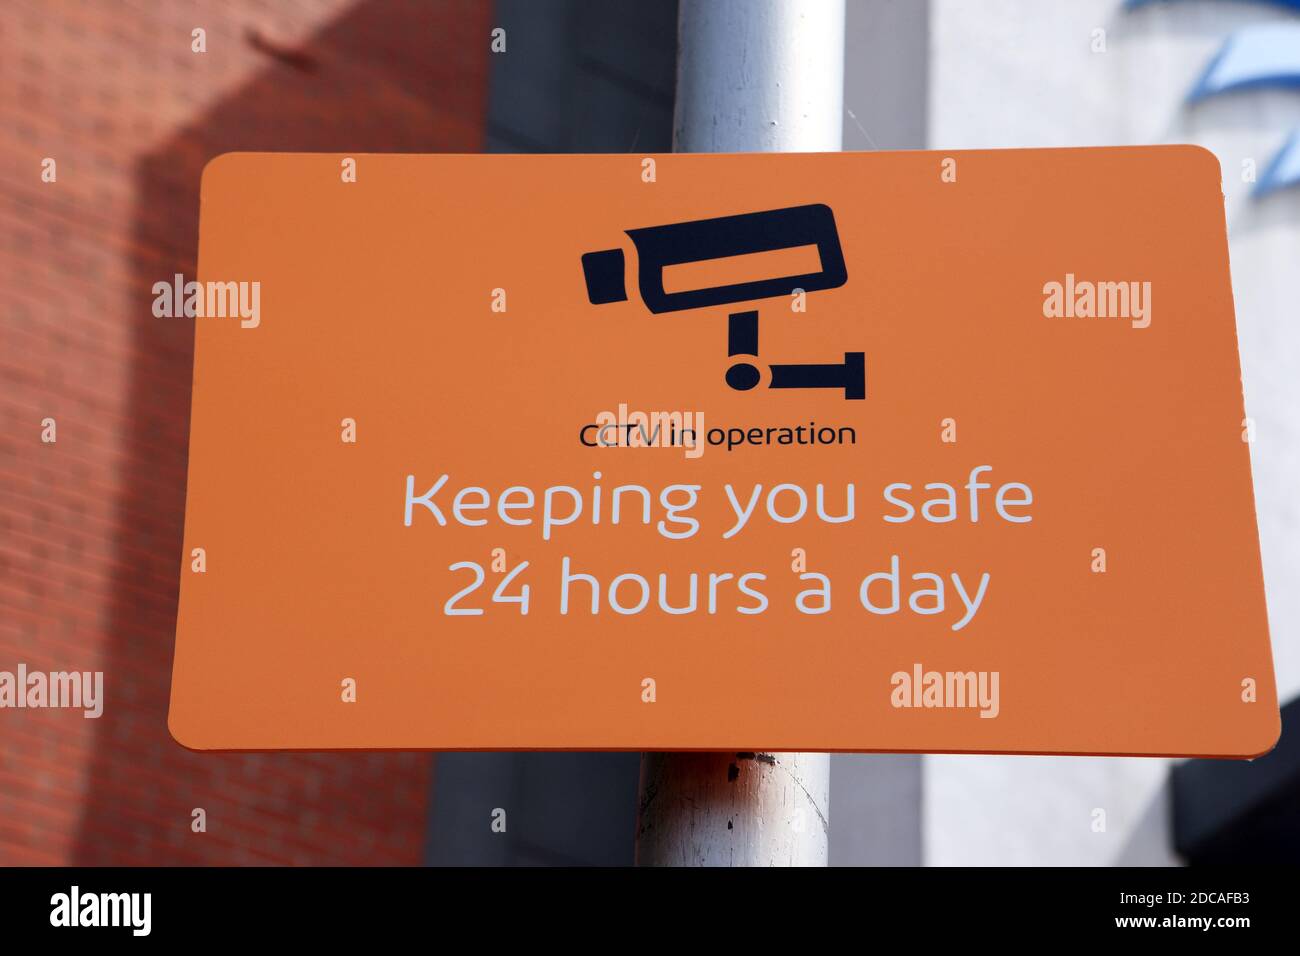 Security camera sign with a 'keeping you safe 24 hours a day' message Stock Photo